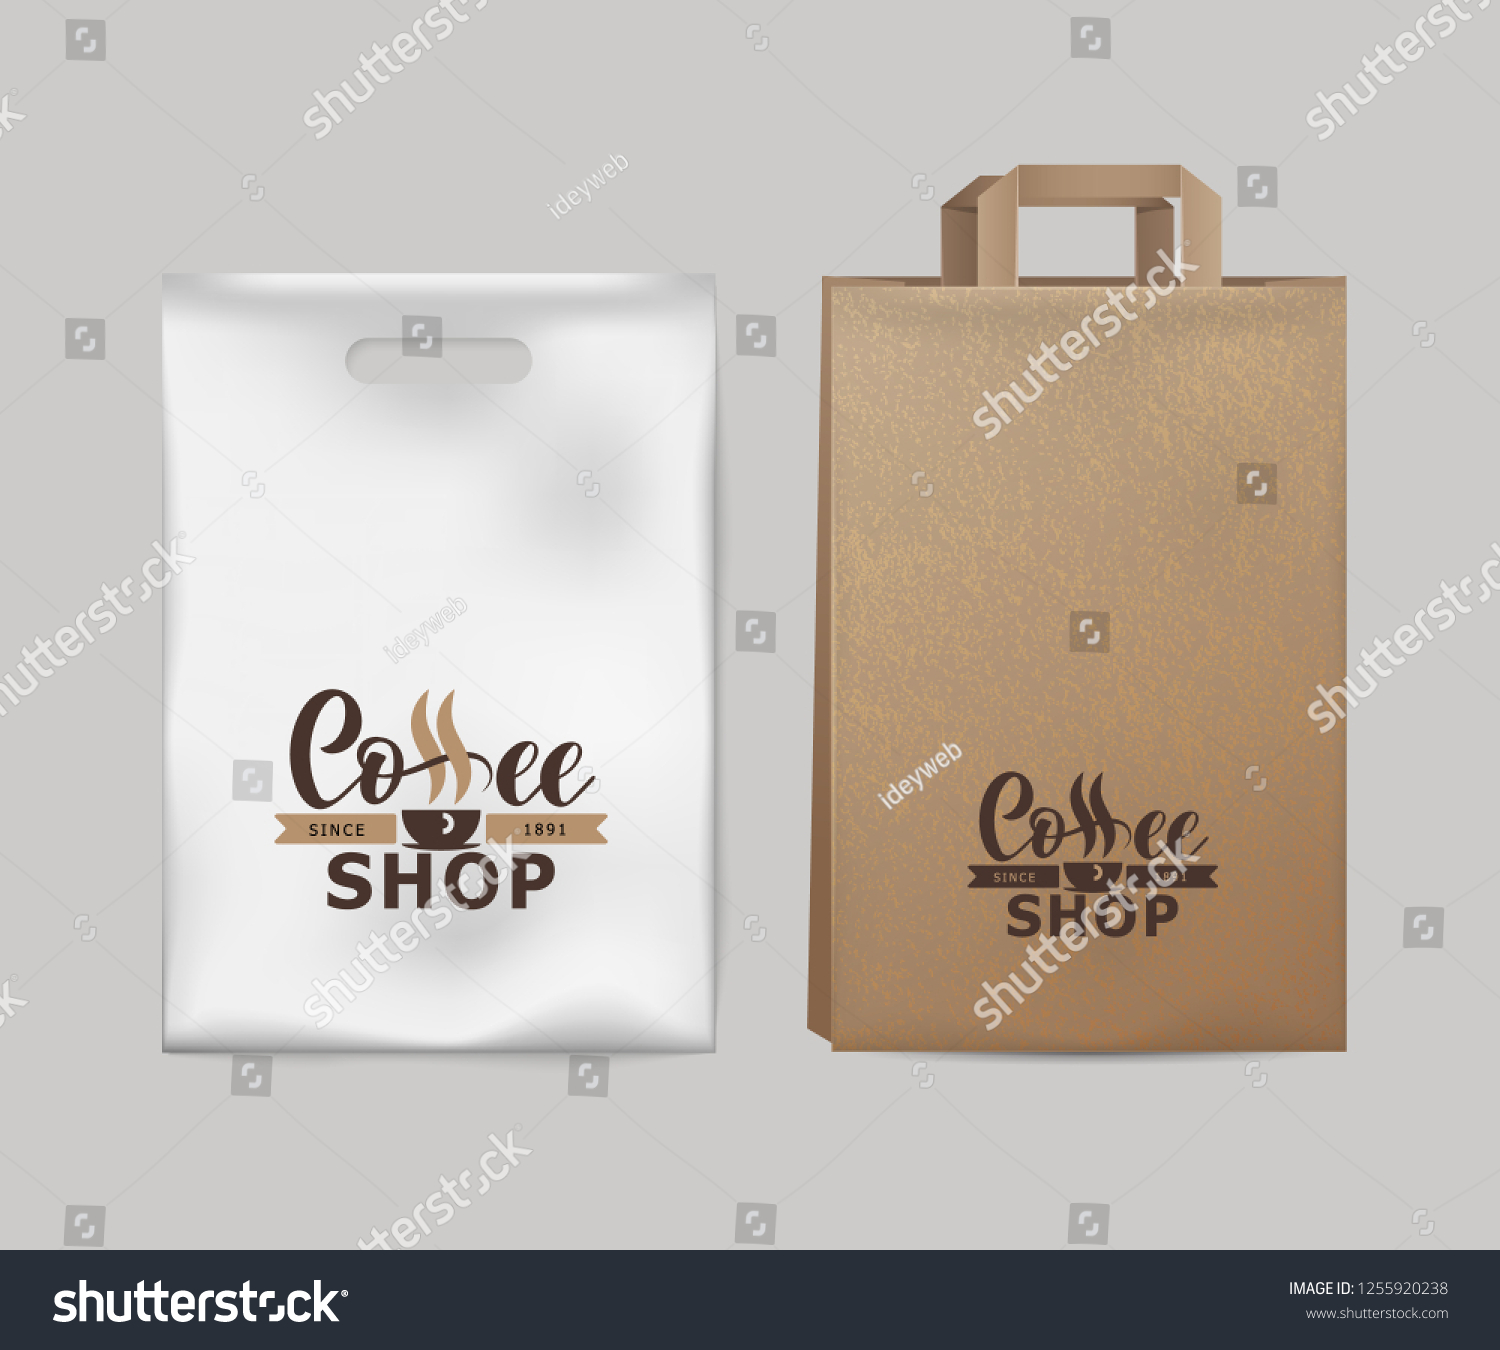 Download Corporate Identity Coffee Industry Realistic Branding Stock Vector Royalty Free 1255920238 Yellowimages Mockups